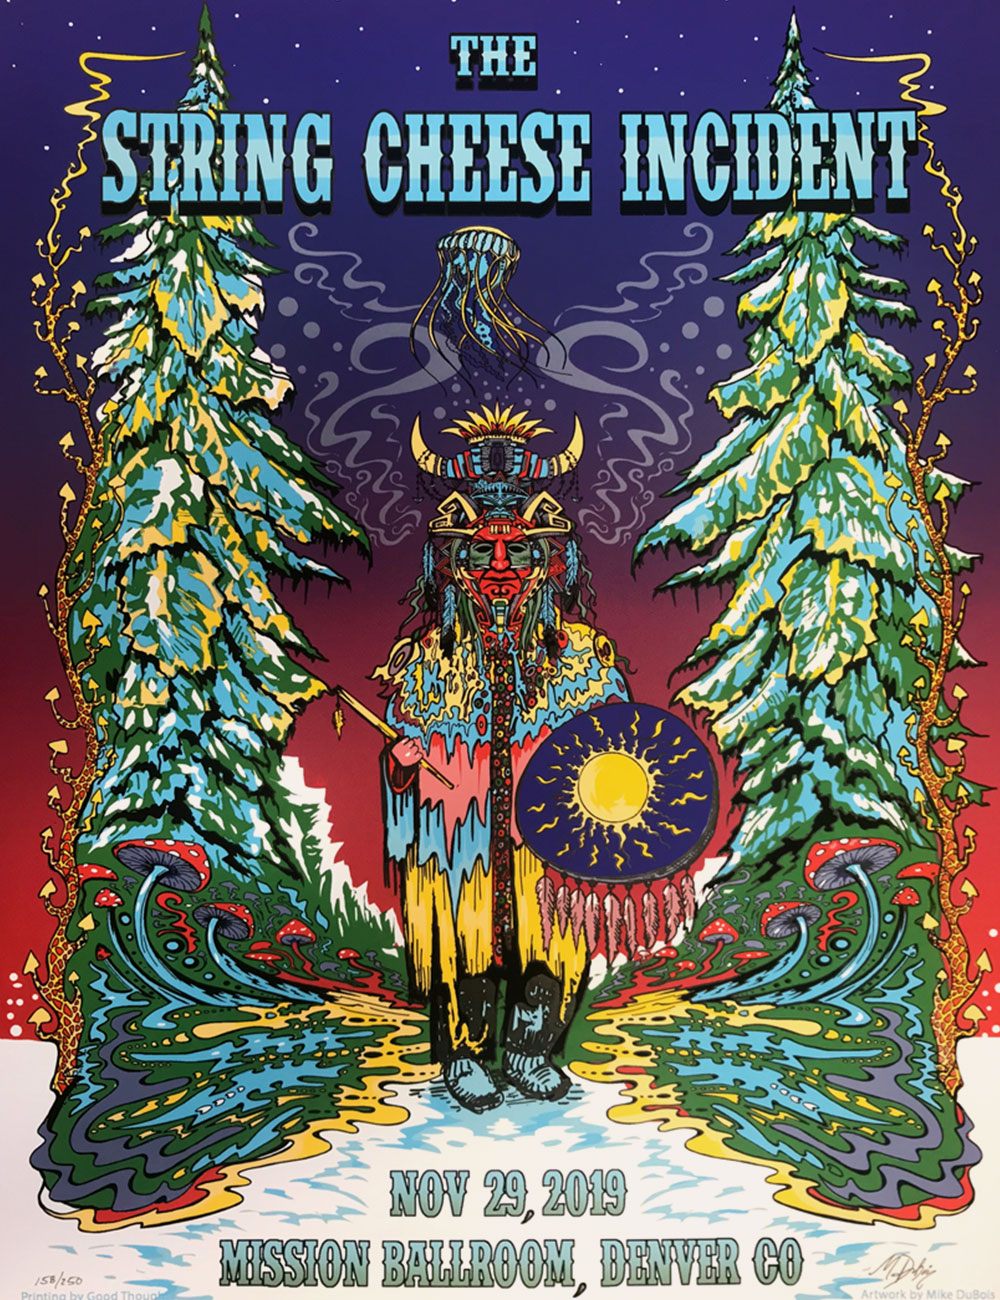 The String Cheese Incident - Merch - Poster - 2019 Mission Ballroom - Denver - November 29th - Detail